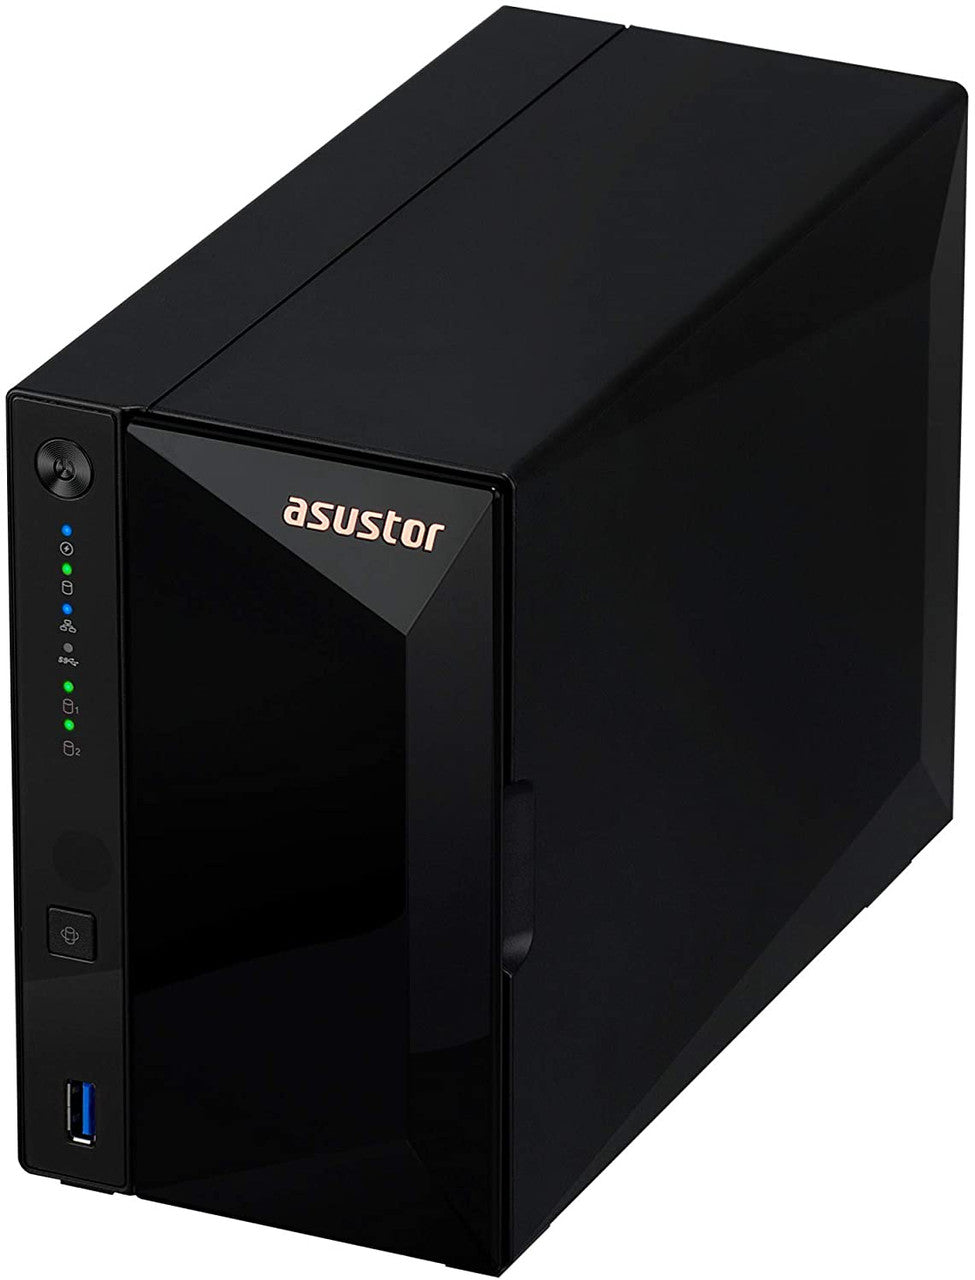 Asustor AS3302T 2-Bay Drivestor 2 PRO NAS with 2GB RAM and 16TB (2x8TB) Seagate Ironwolf PRO Drives Fully Assembled and Tested